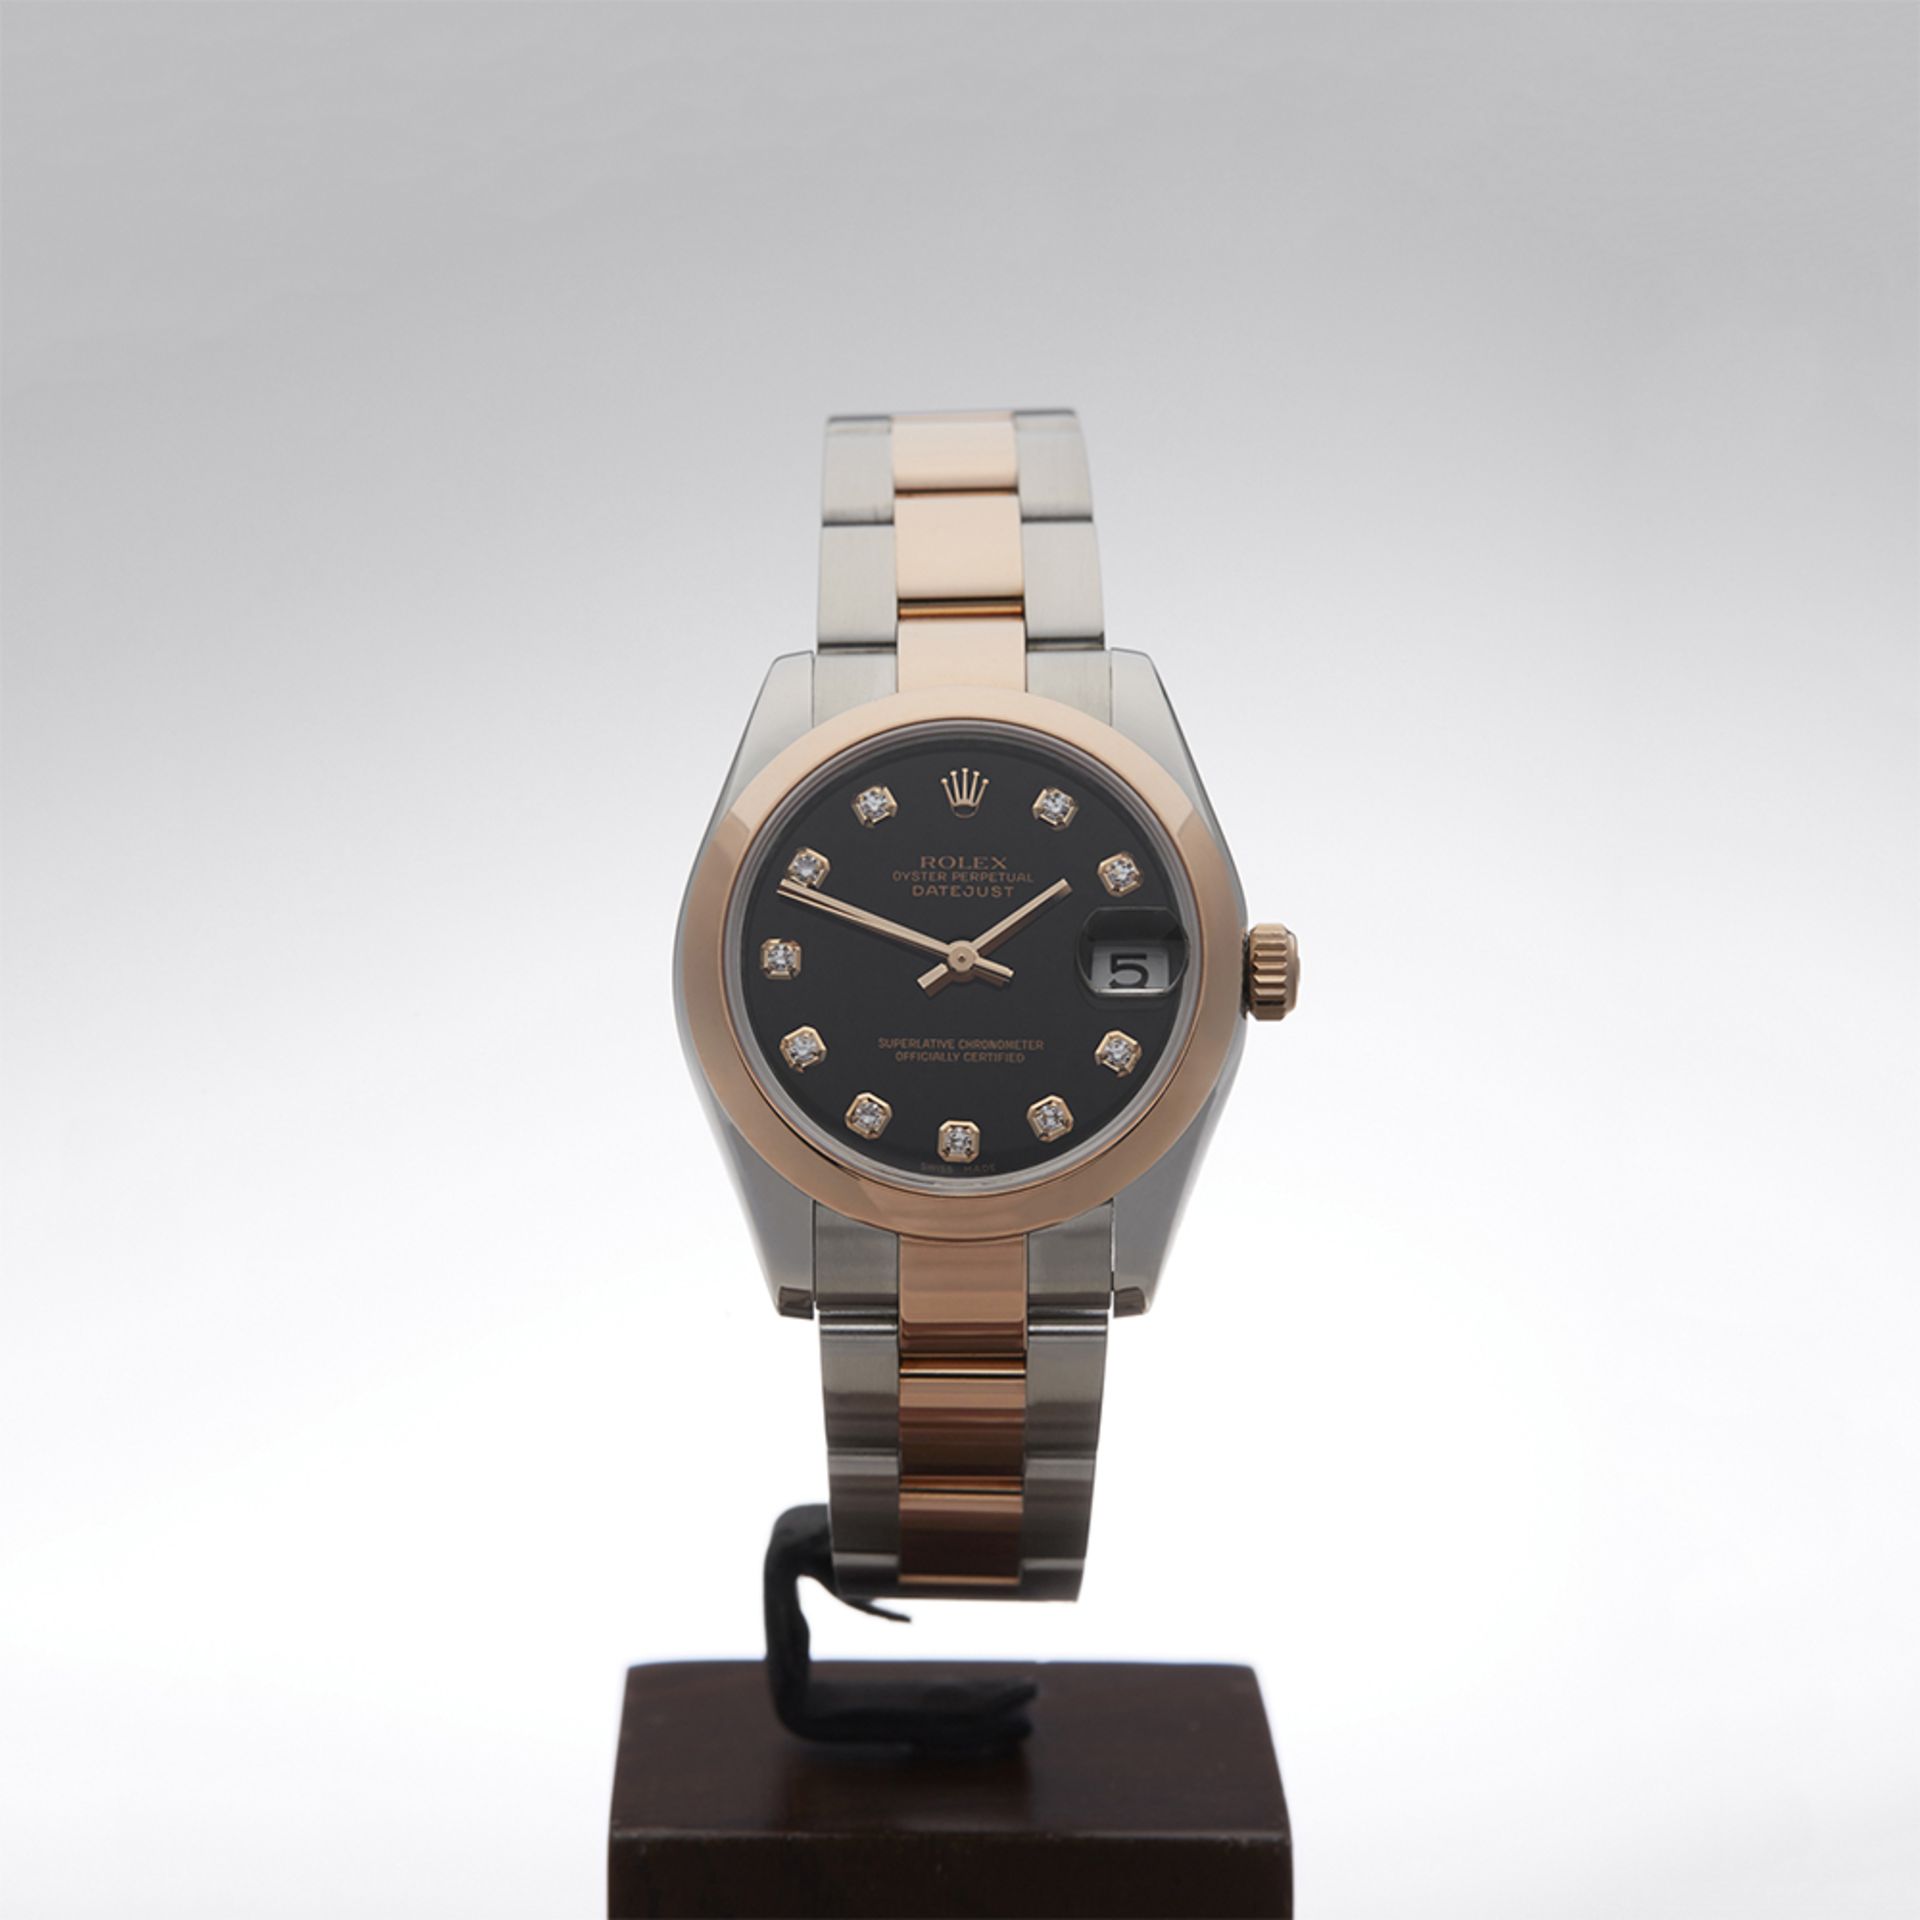 Datejust 31mm Stainless Steel & 18k Rose Gold - 178241 - Image 2 of 9